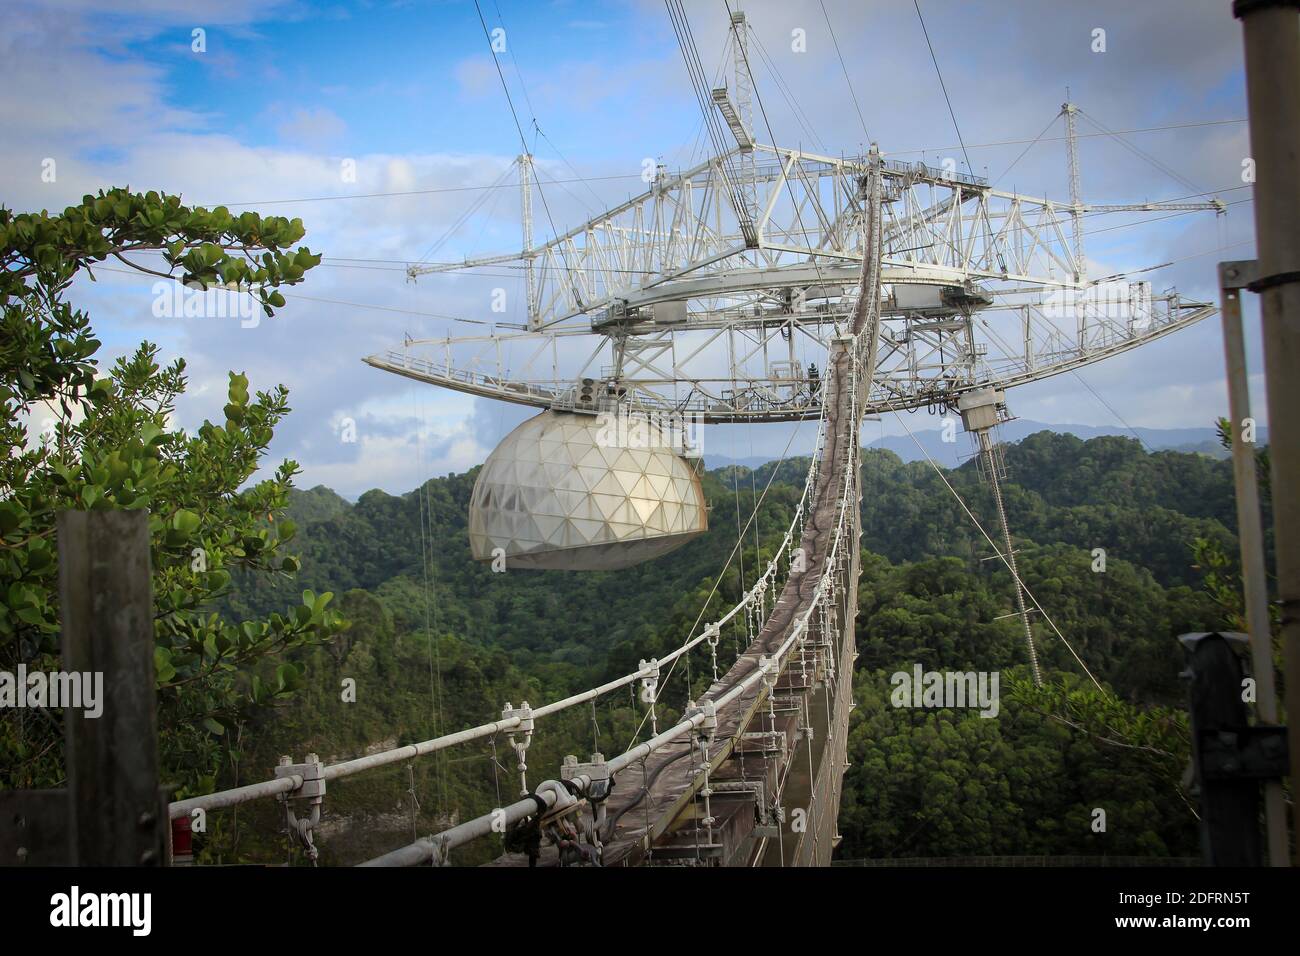 The Arecibo Observatory in Puerto Rico is one of the most important national centers for radio astronomy, planetary radar and ionospheric science. Photo by The University of Central Florida. Stock Photo